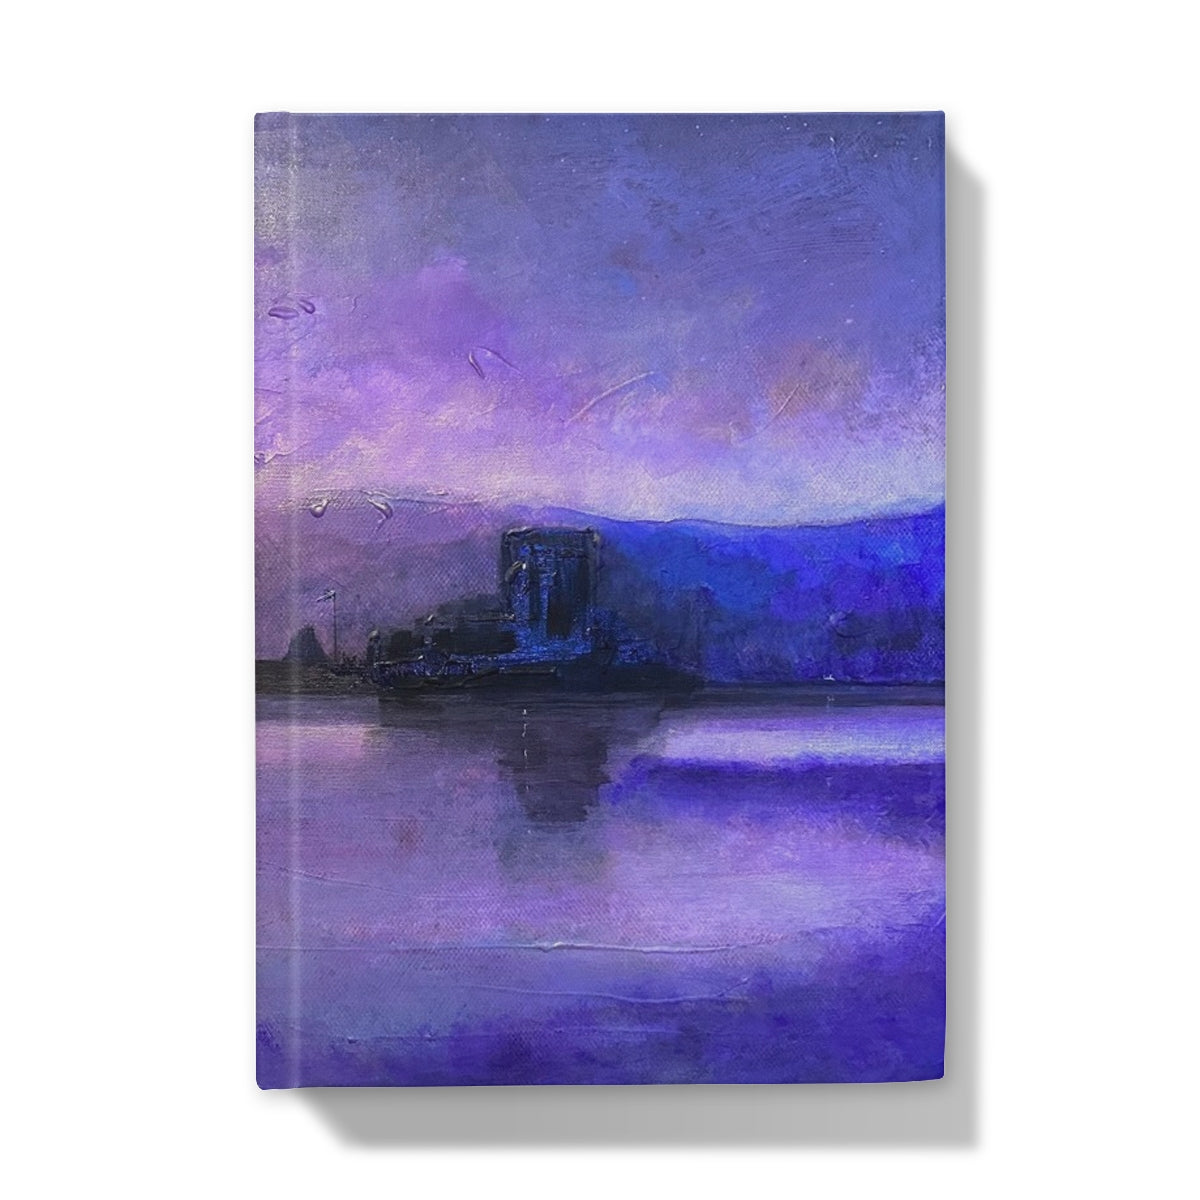 Eilean Donan Castle Moonset Art Gifts Hardback Journal-Journals & Notebooks-Historic & Iconic Scotland Art Gallery-A5-Lined-Paintings, Prints, Homeware, Art Gifts From Scotland By Scottish Artist Kevin Hunter